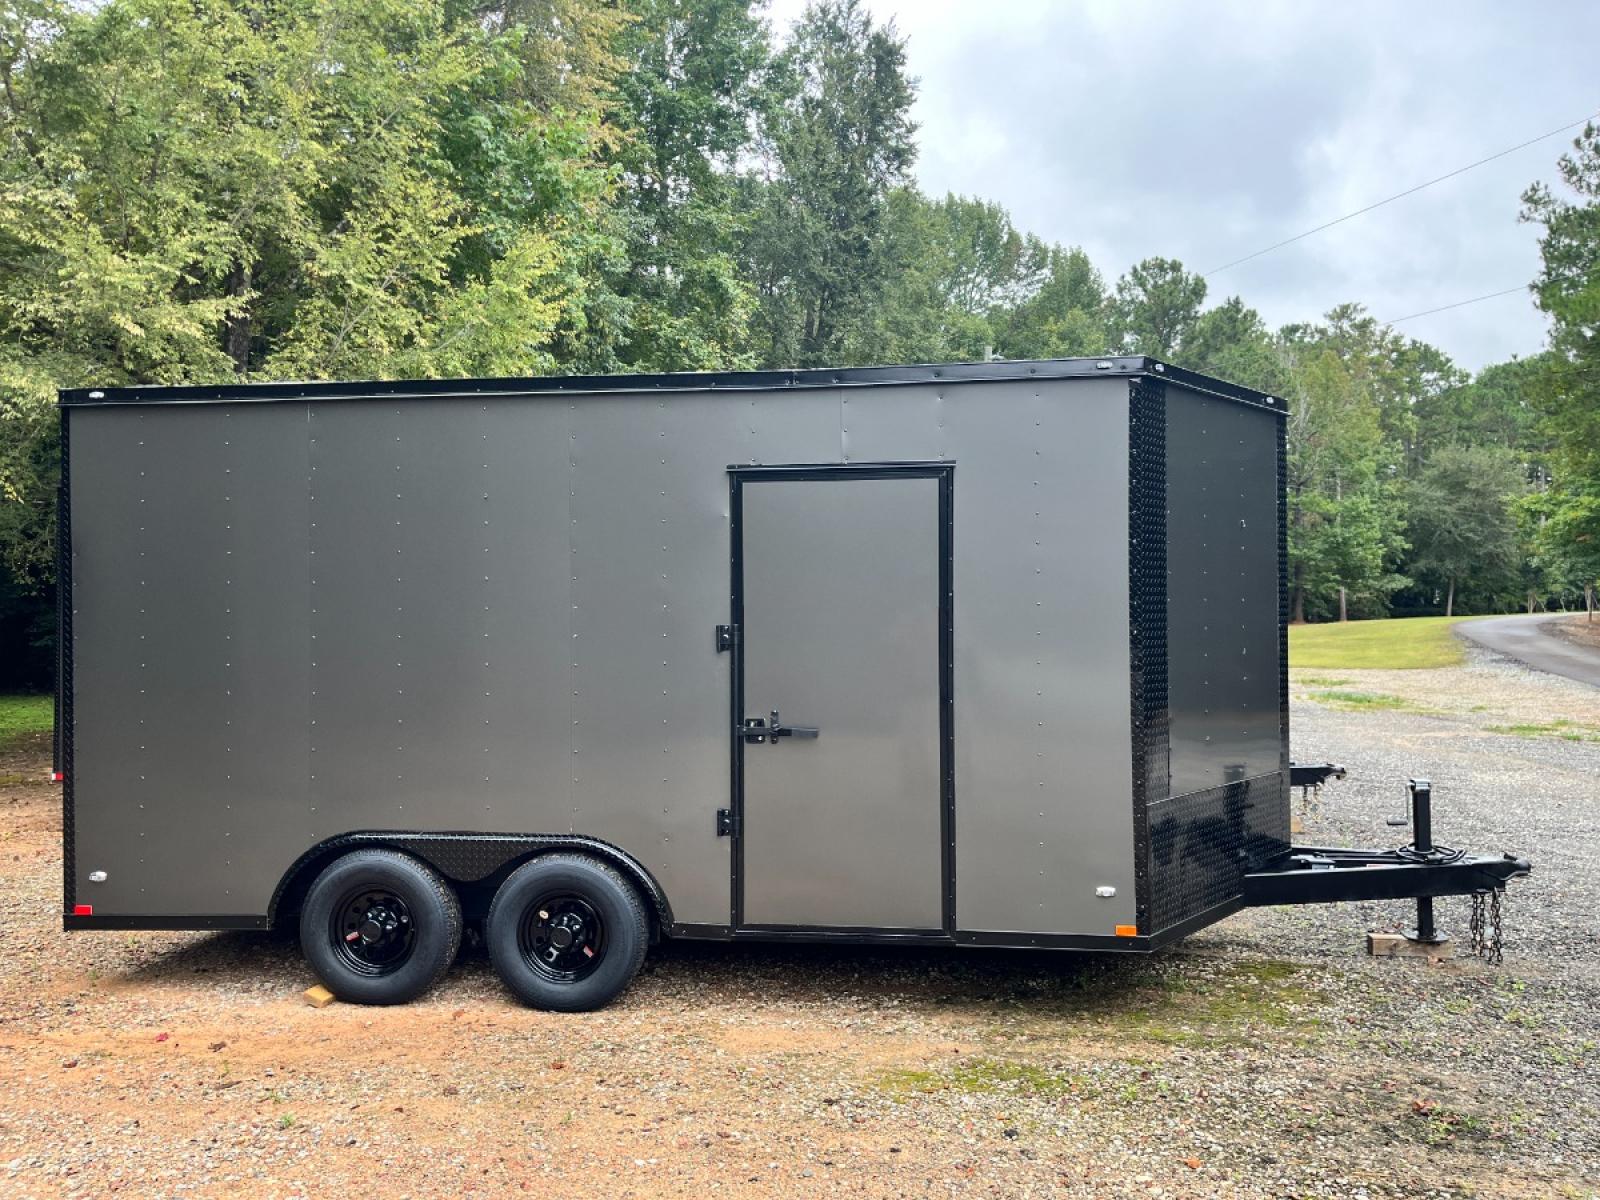 2023 .080 Charcoal Elite Cargo 8.5ft X 16ft Tandem , located at 1330 Rainey Rd., Macon, 31220, (478) 960-1044, 32.845638, -83.778687 - New 2023 Elite 8.5ft X 16ft Tandem Enclosed Cargo Trailer! Made by Elite Trailers, in Tifton, Ga! Built December 2022! This is the Best Quality Trailer Built Today, in Georgia! .080 Thick Charcoal Metallic Skin, with the Black Out Pkg Trim! One Piece Rubber Roof, on top of 7/16" OSB, for a Super - Photo #1